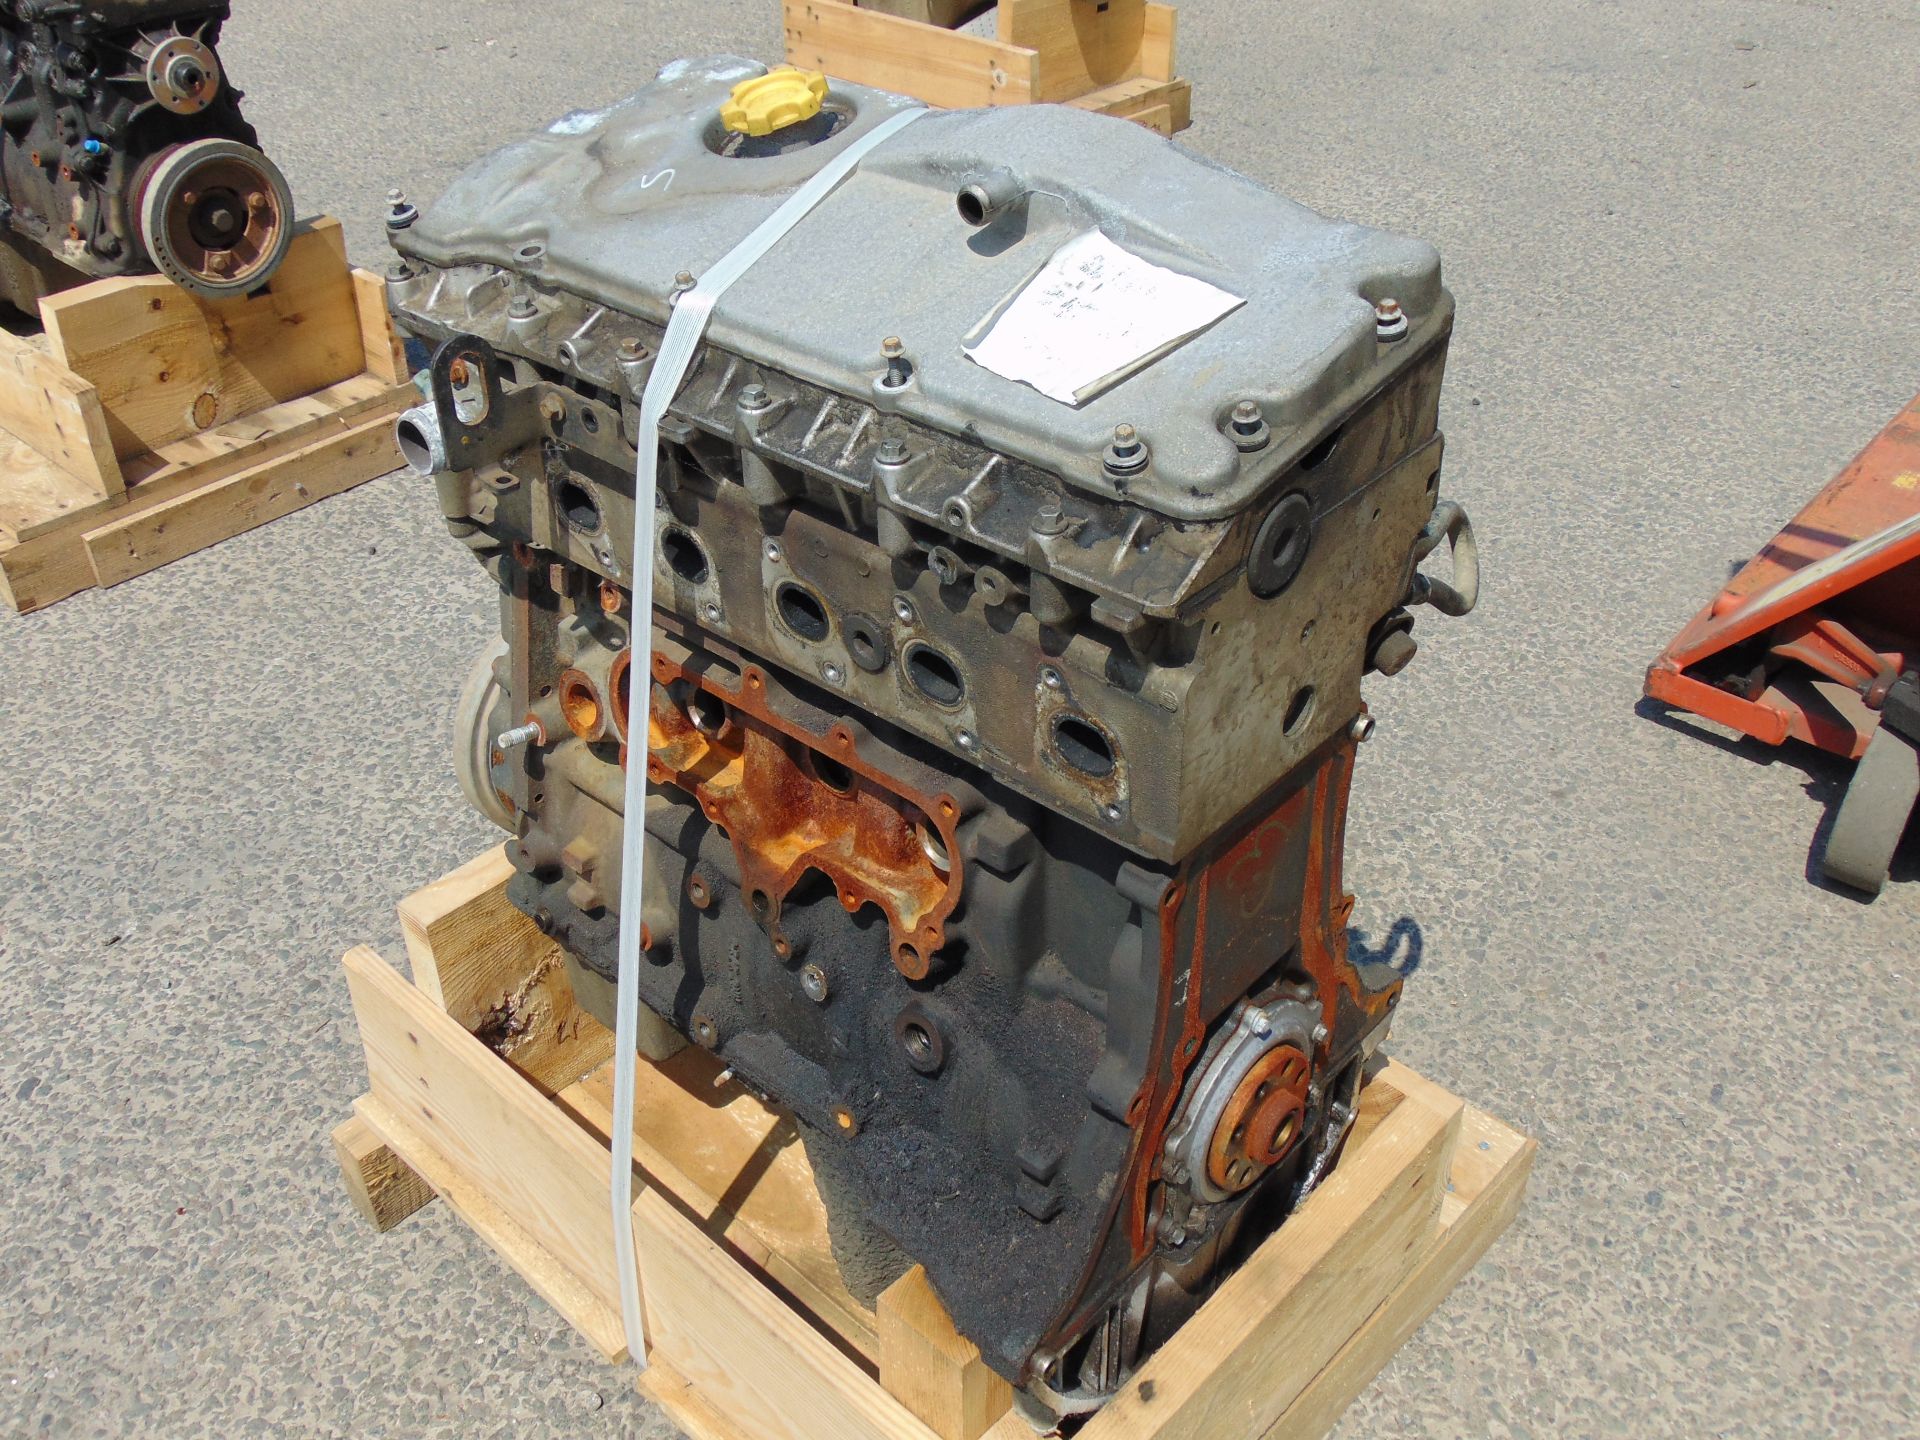 Takeout Land Rover TD5 Engine - Image 6 of 6